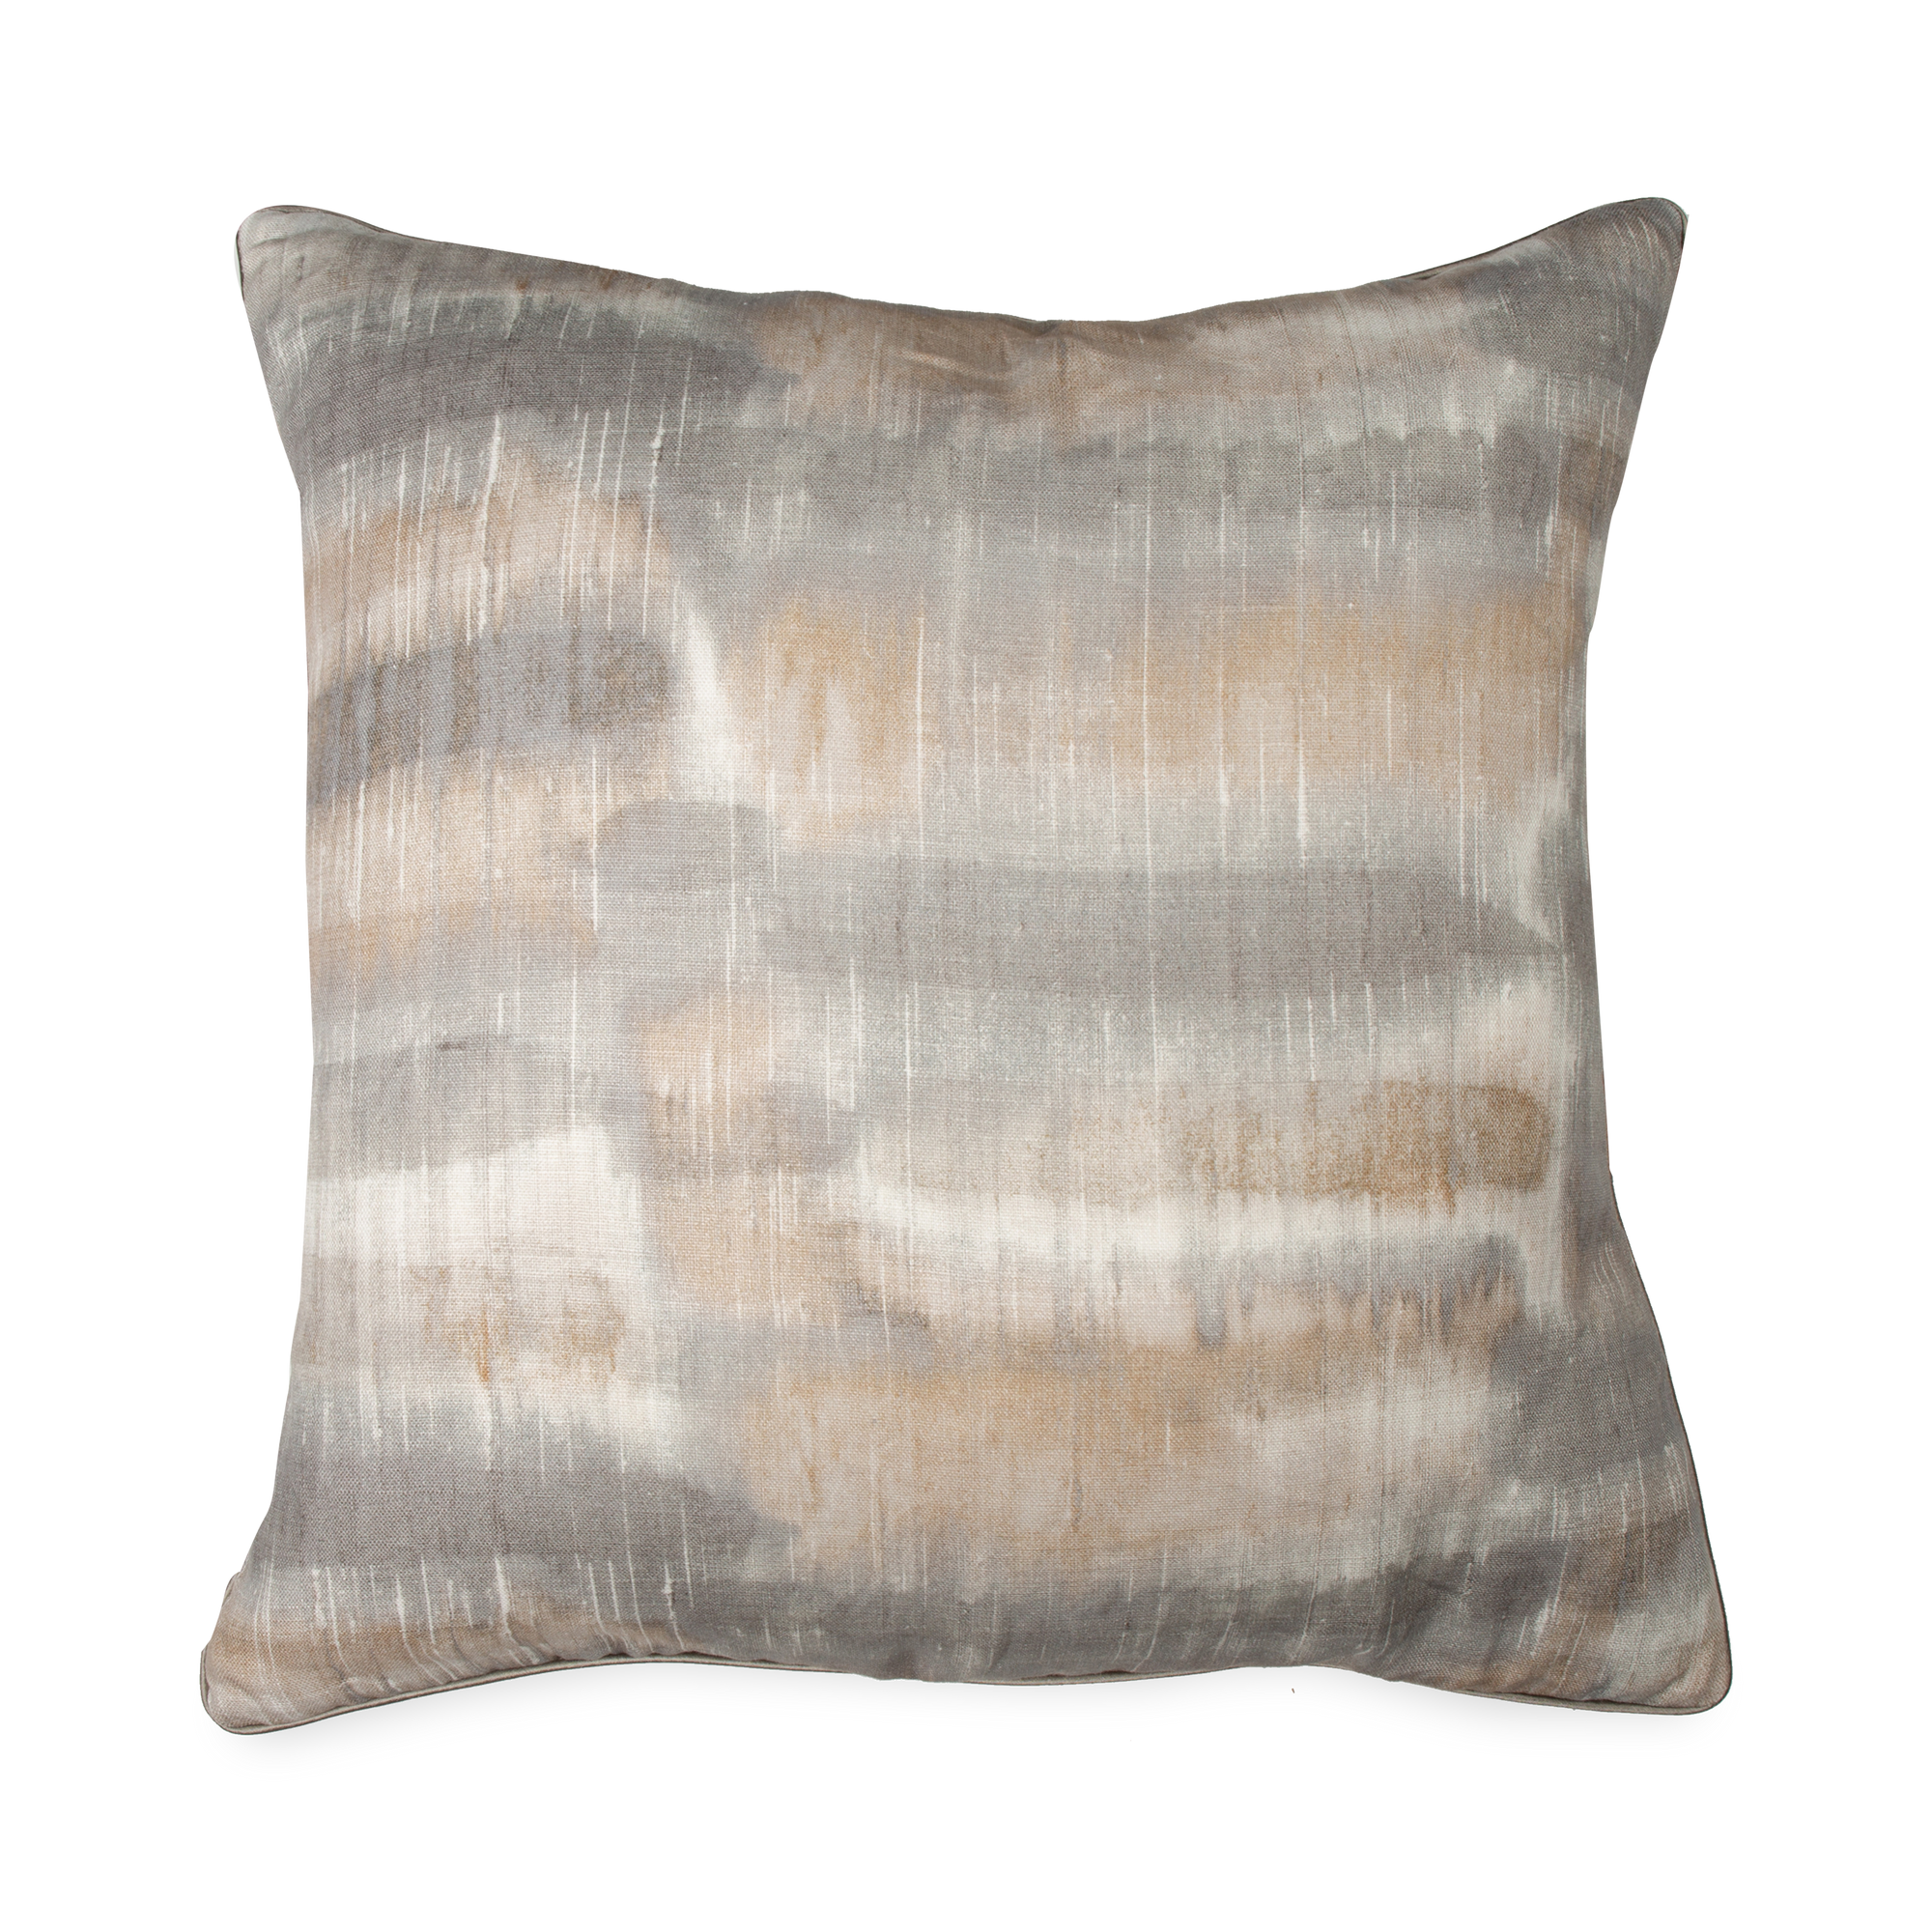 This Horizon Pillow is crafted with 100% linen for a luxurious feel and features a stunning abstract design.